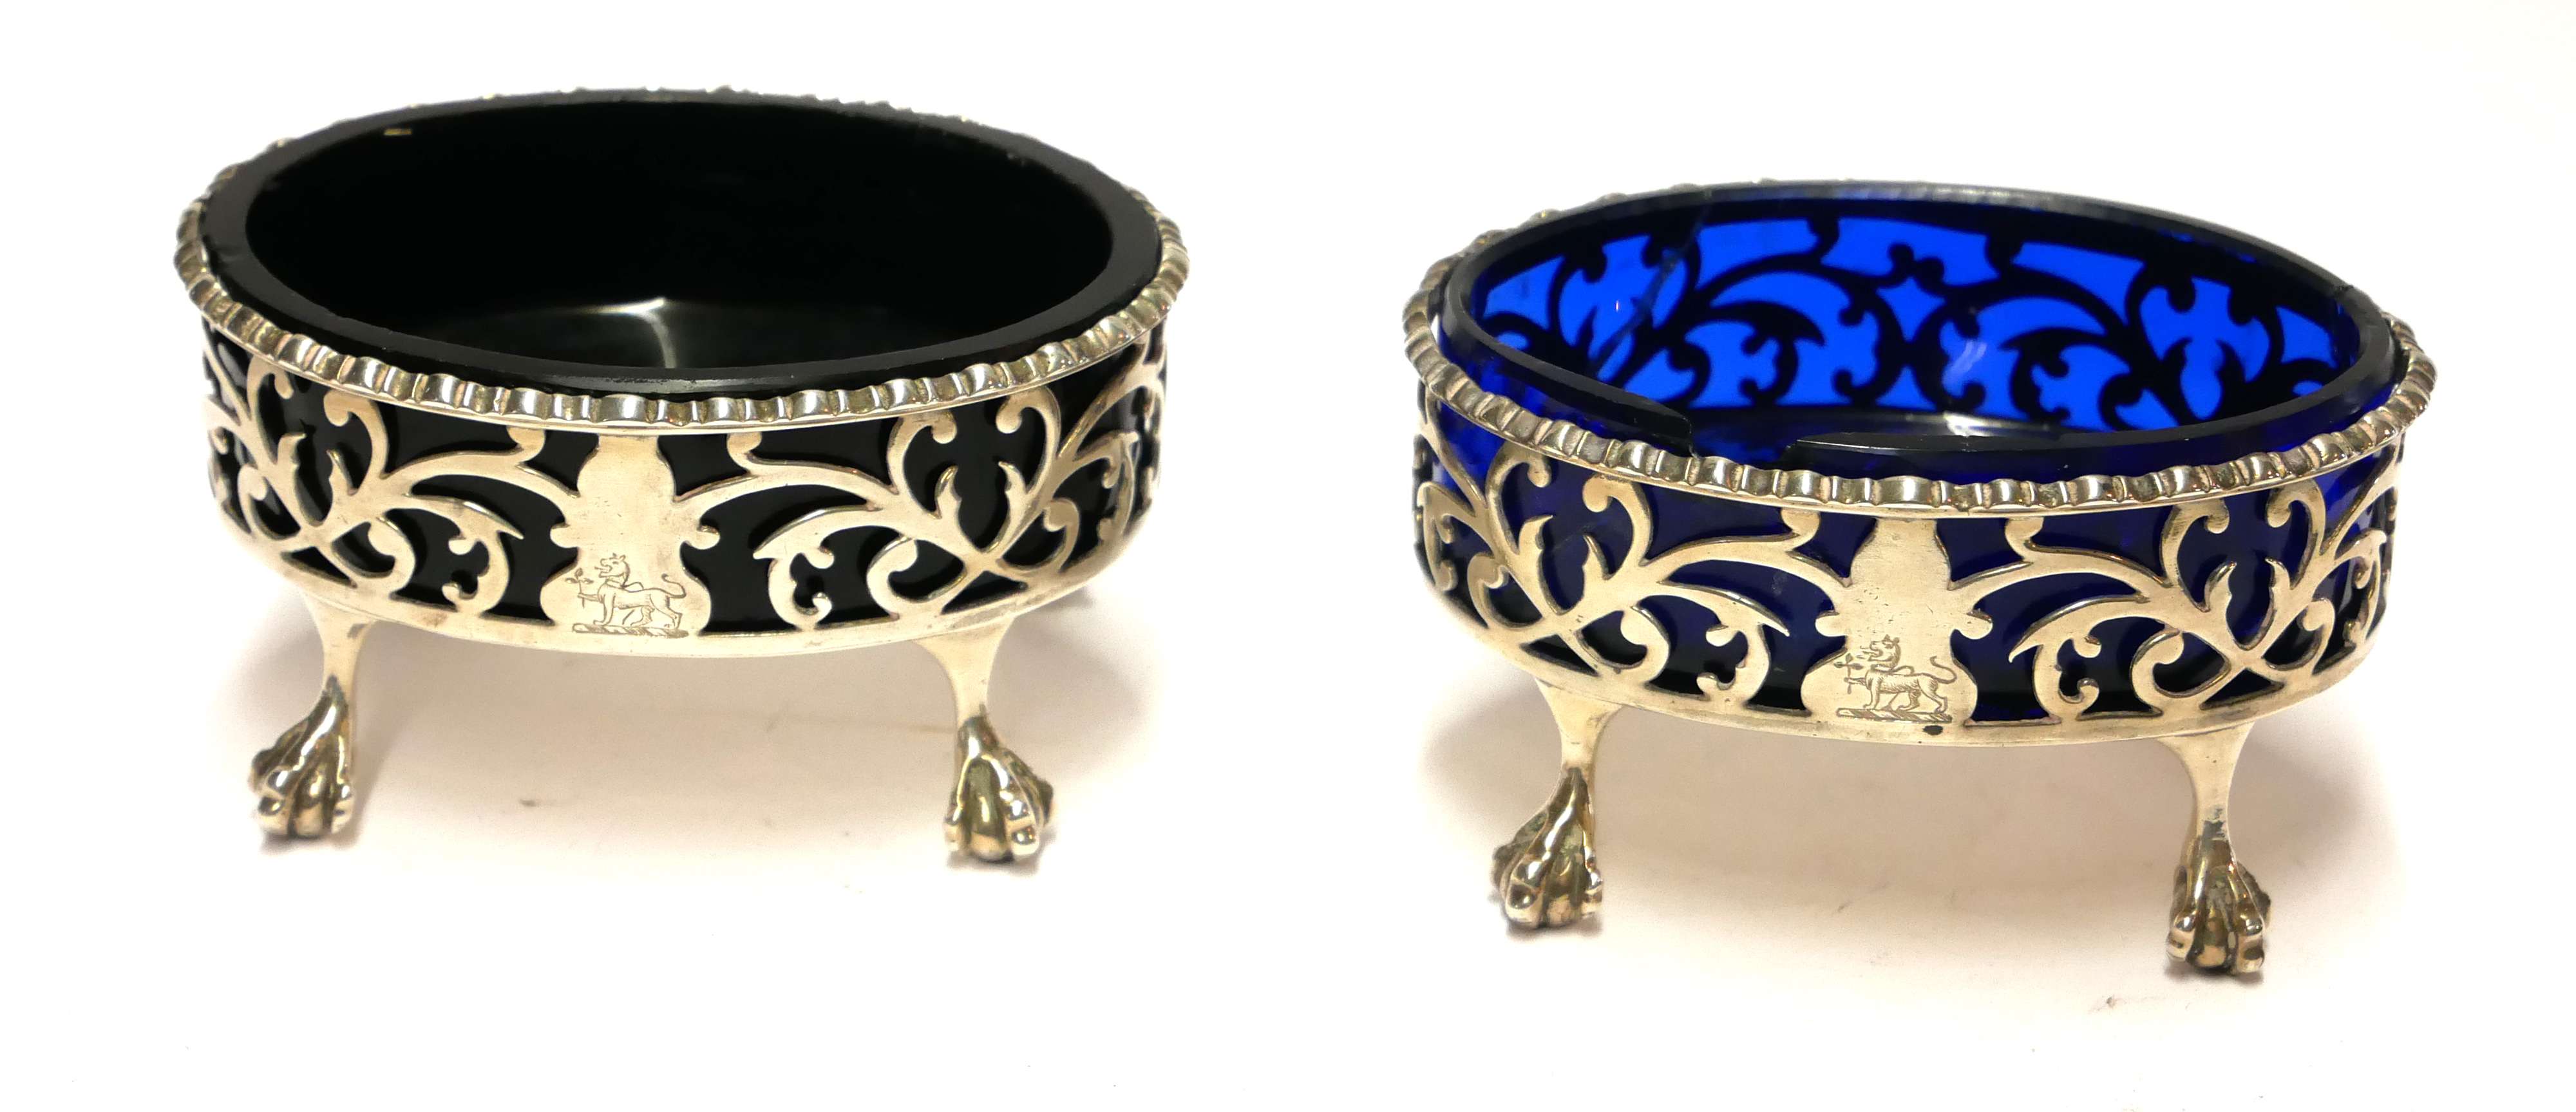 A PAIR OF GEORGIAN SILVER AND BLUE GLASS OVAL SALTS With pierced scrolled decoration raised on eagle